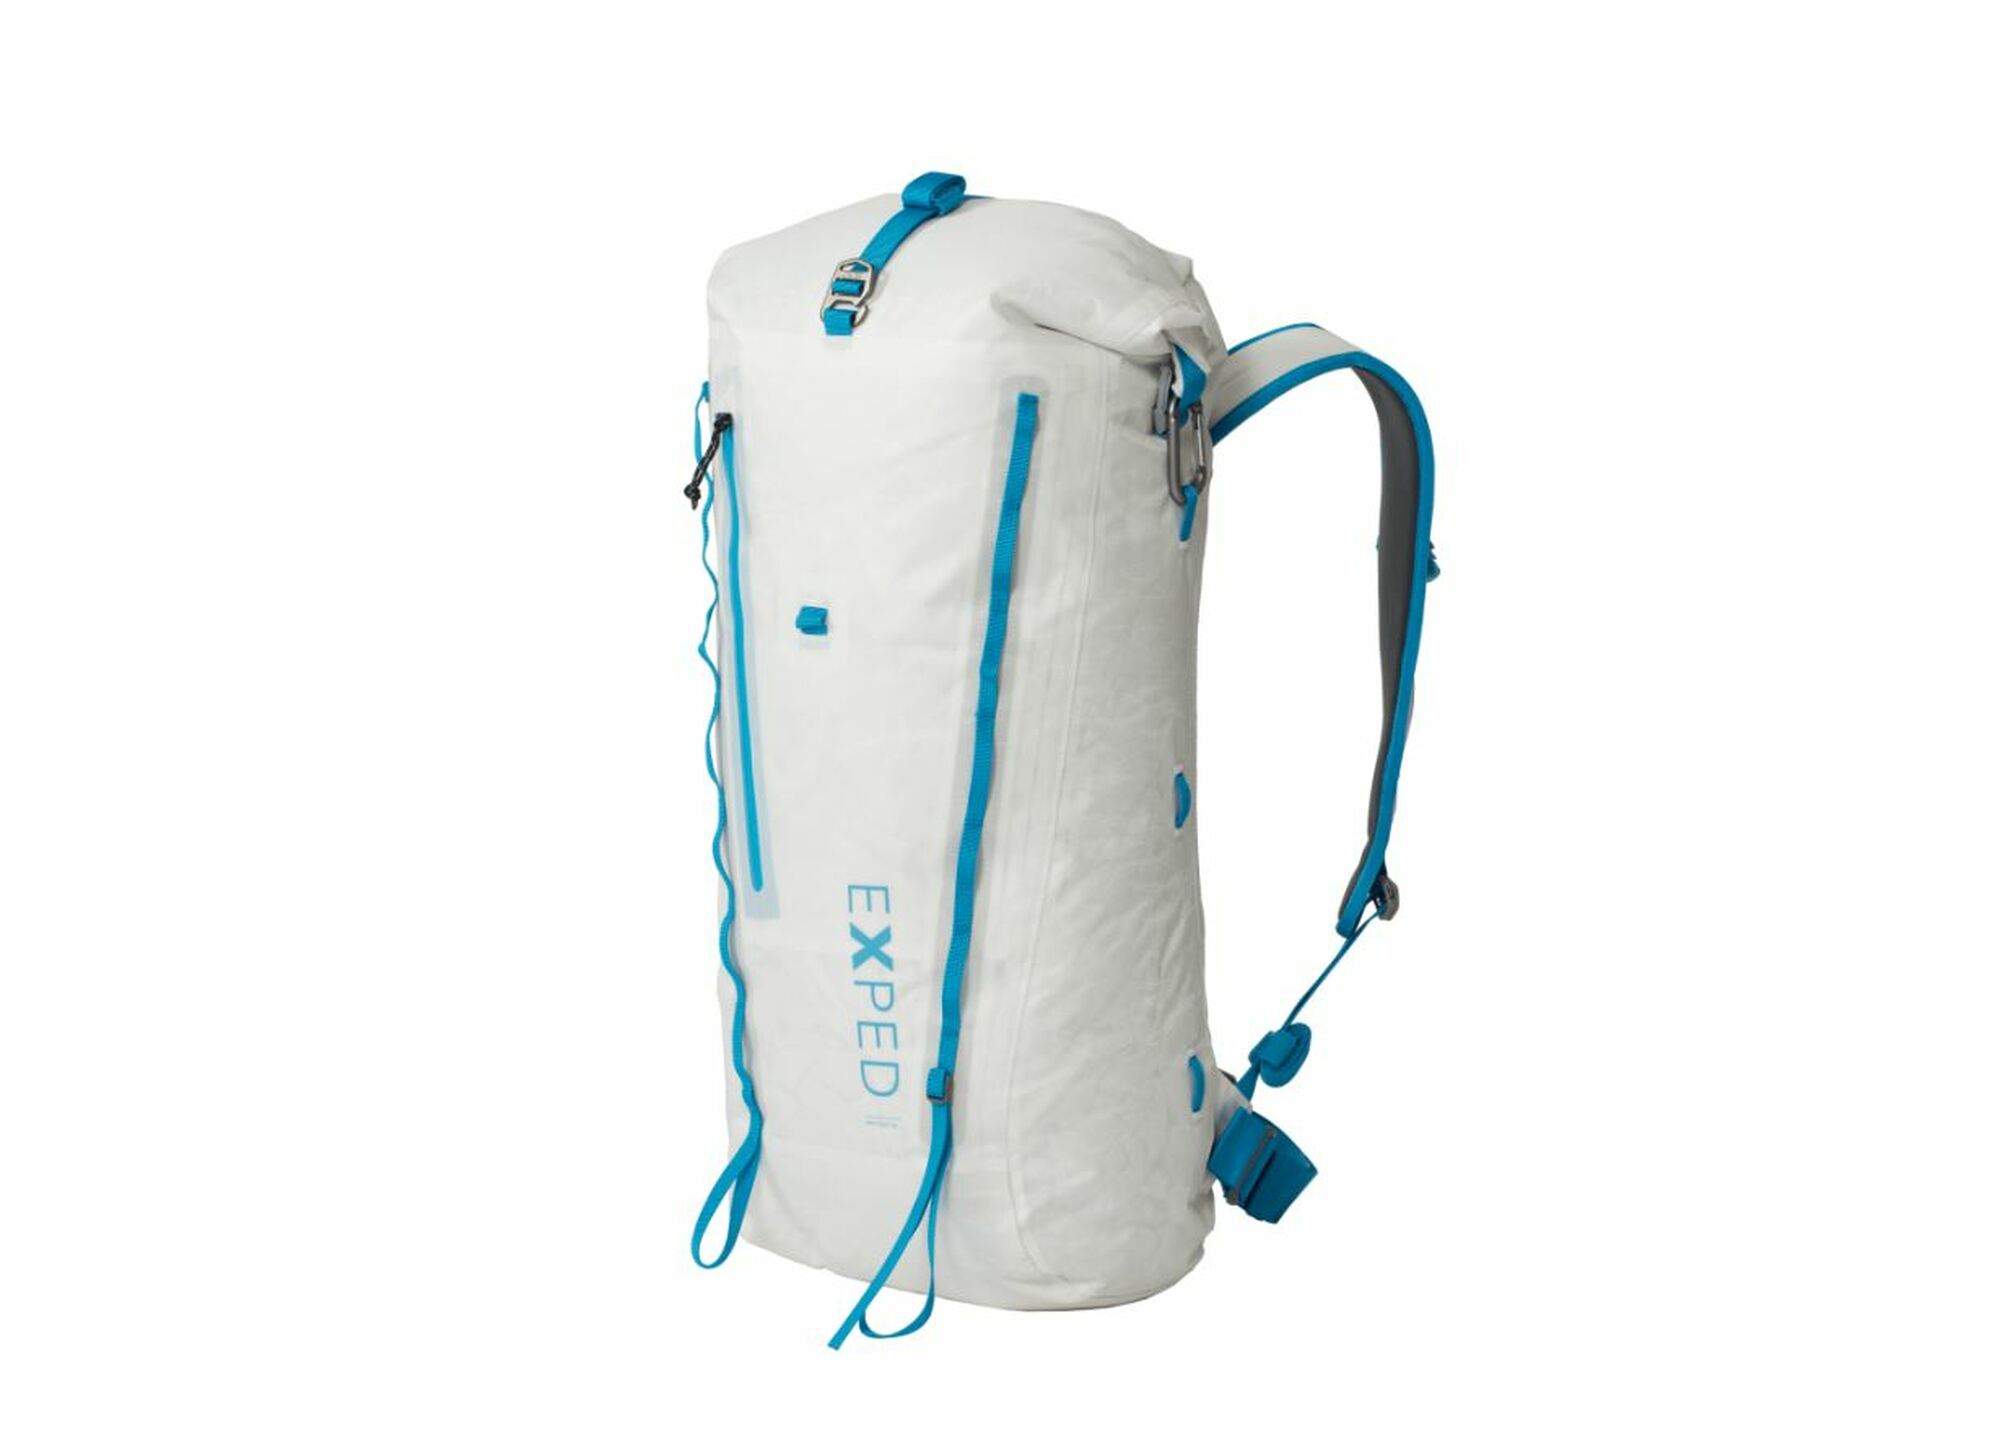 Im Test: Exped Whiteout 30